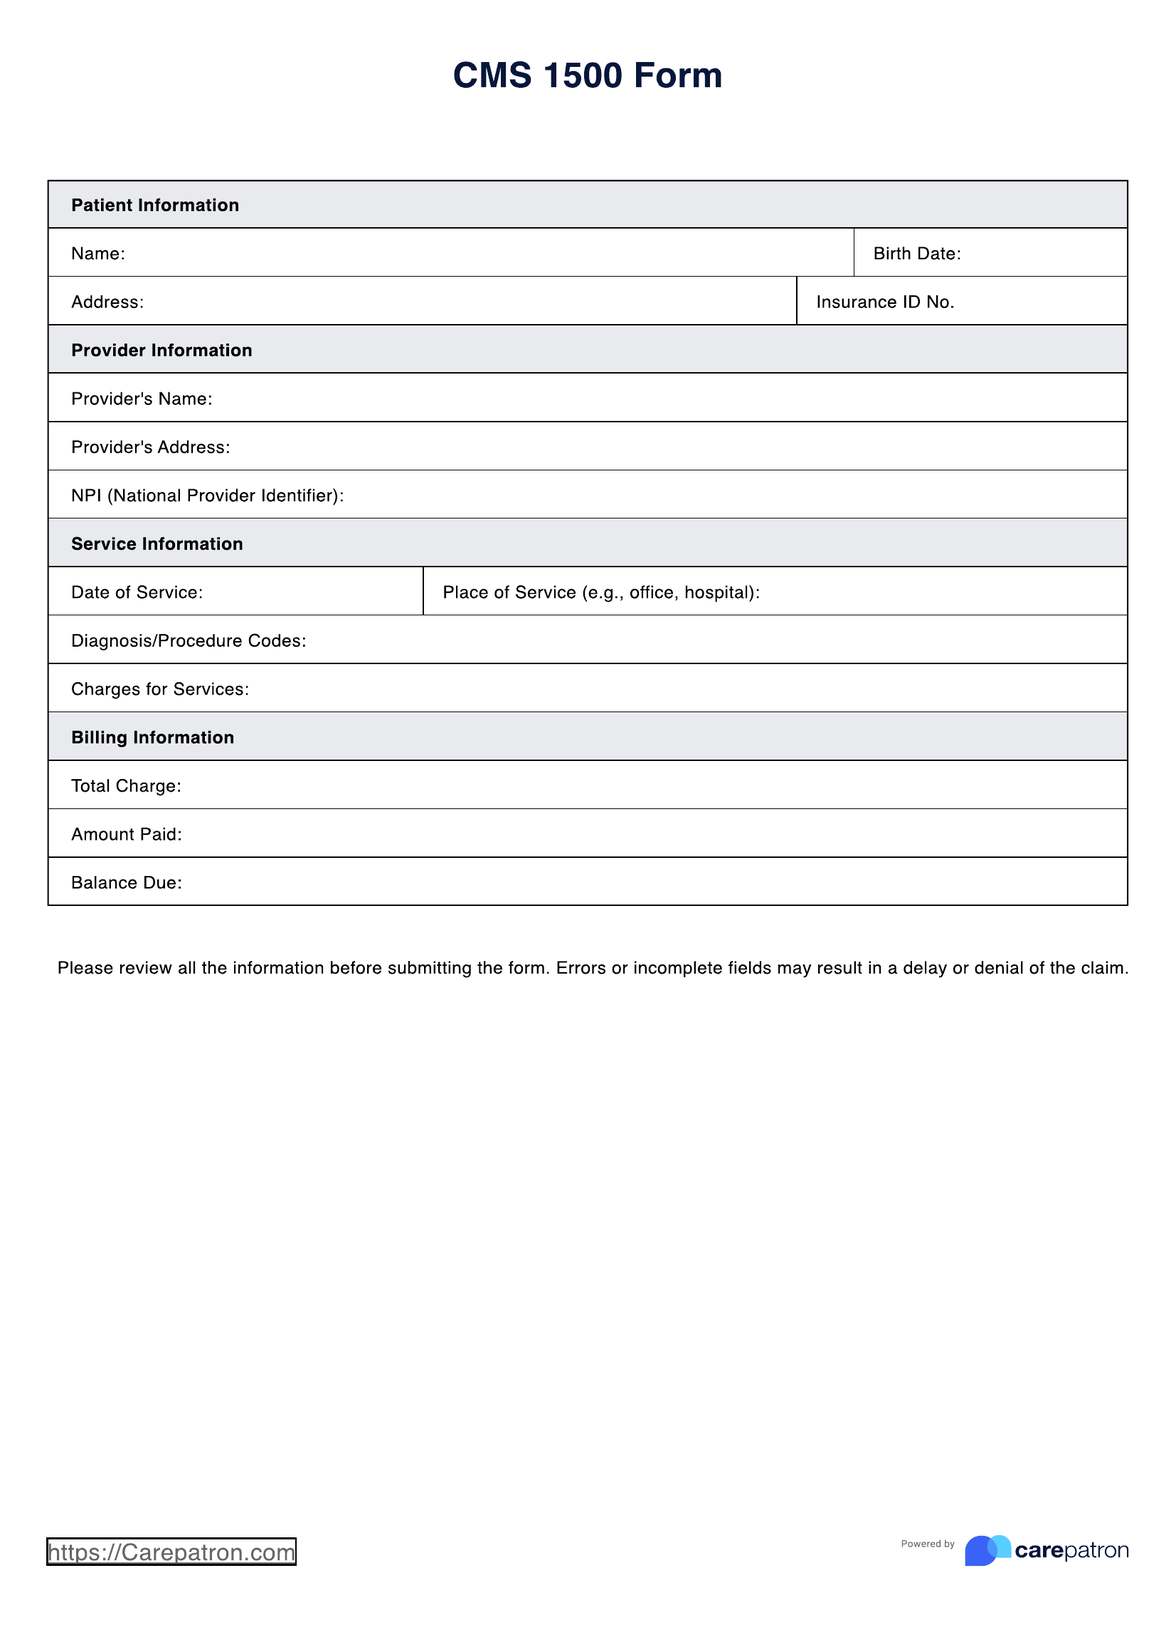 CMS 1500 Forms PDF Example